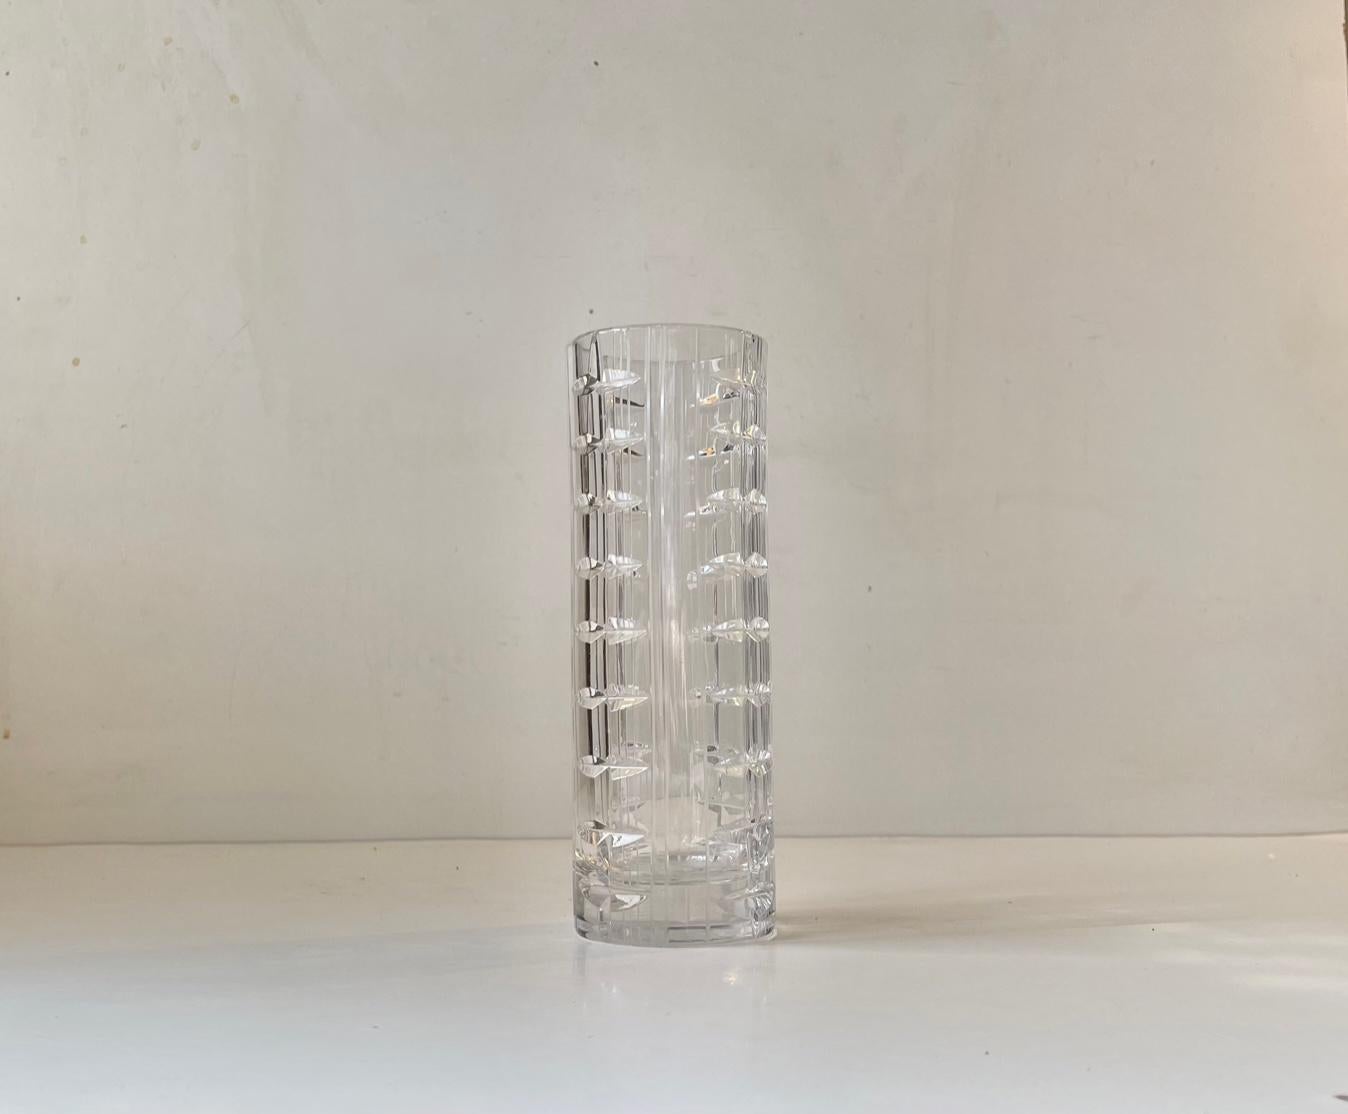 A cut crystal torpedo shaped vase presumably from either Kosta Boda or Orrefors. It features diffrent techniques most prominent the mix of vertical ribbings and geometric patterns. It measures 17.5 cm in height and has a diameter of 6 cm.